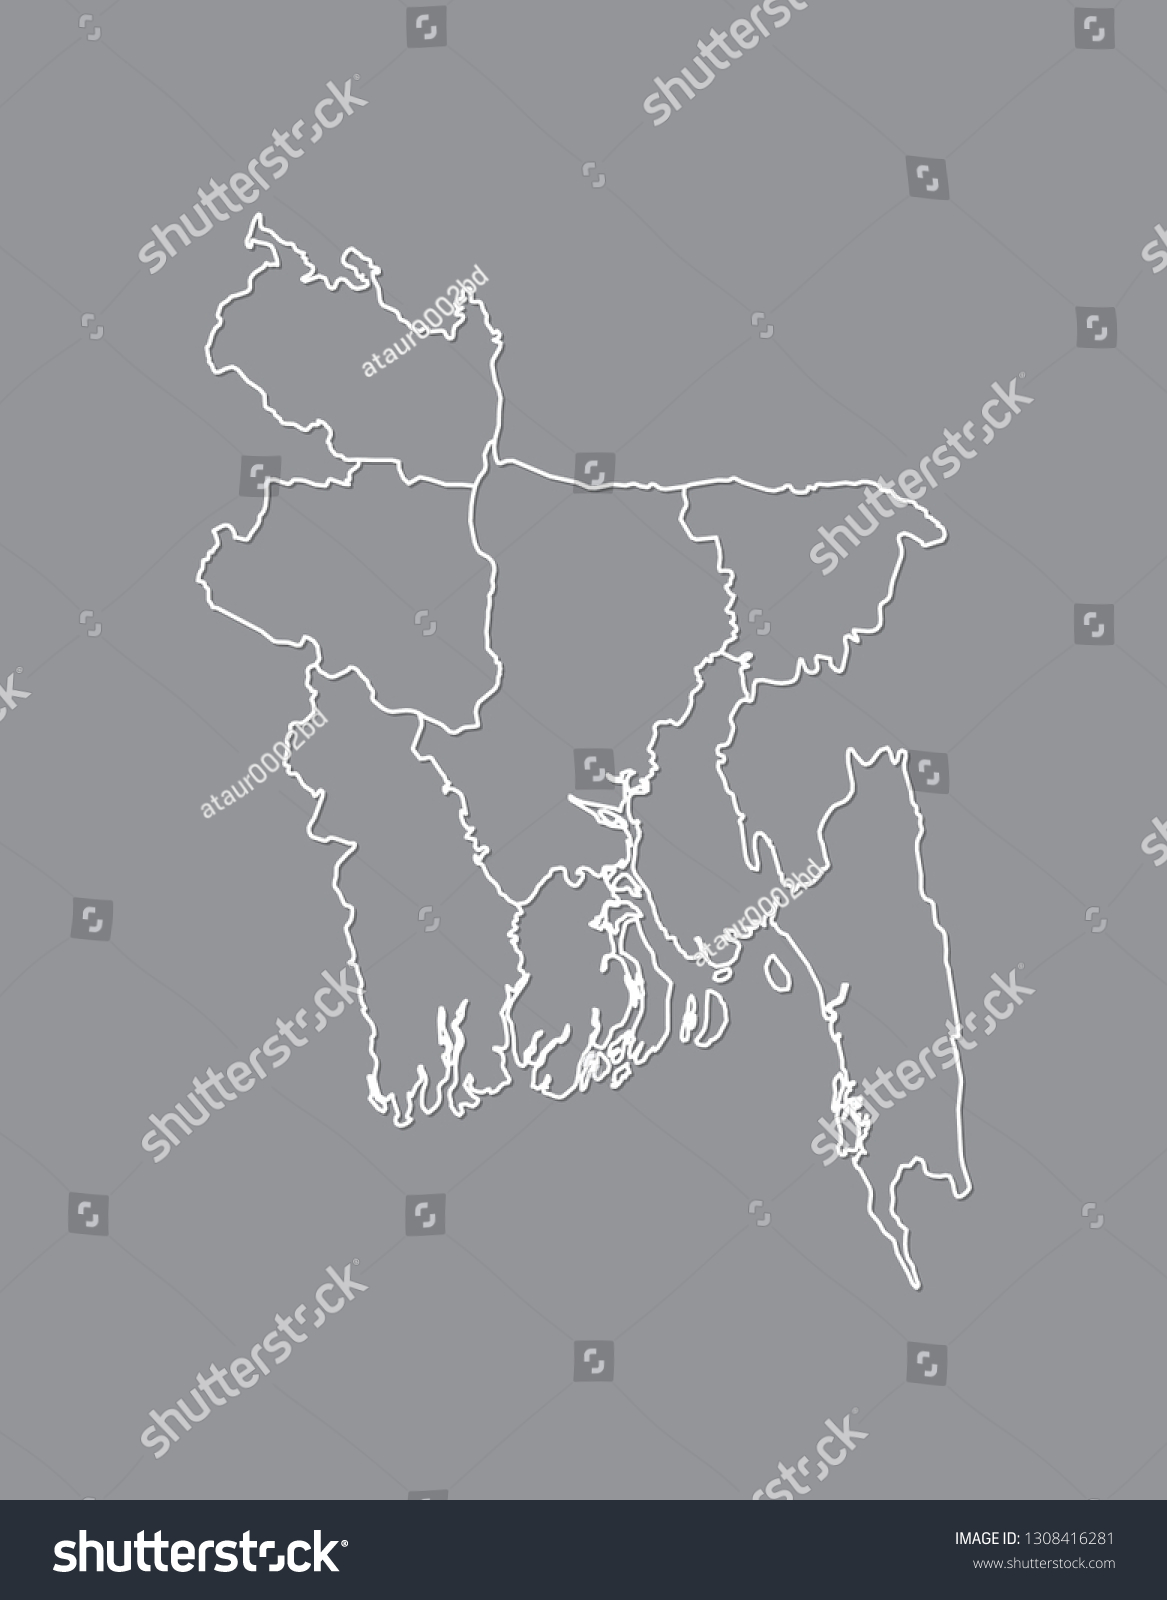 Bangladesh vector map with border lines of divisions using gray color on dark background illustration #1308416281